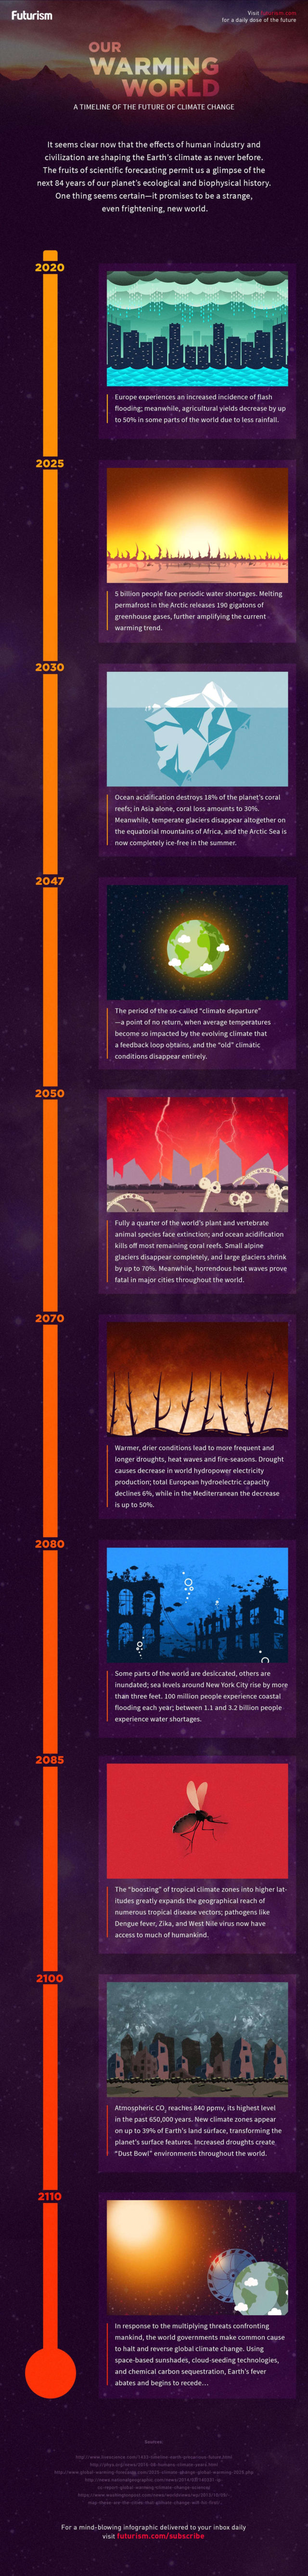 Our Warming World - infographic